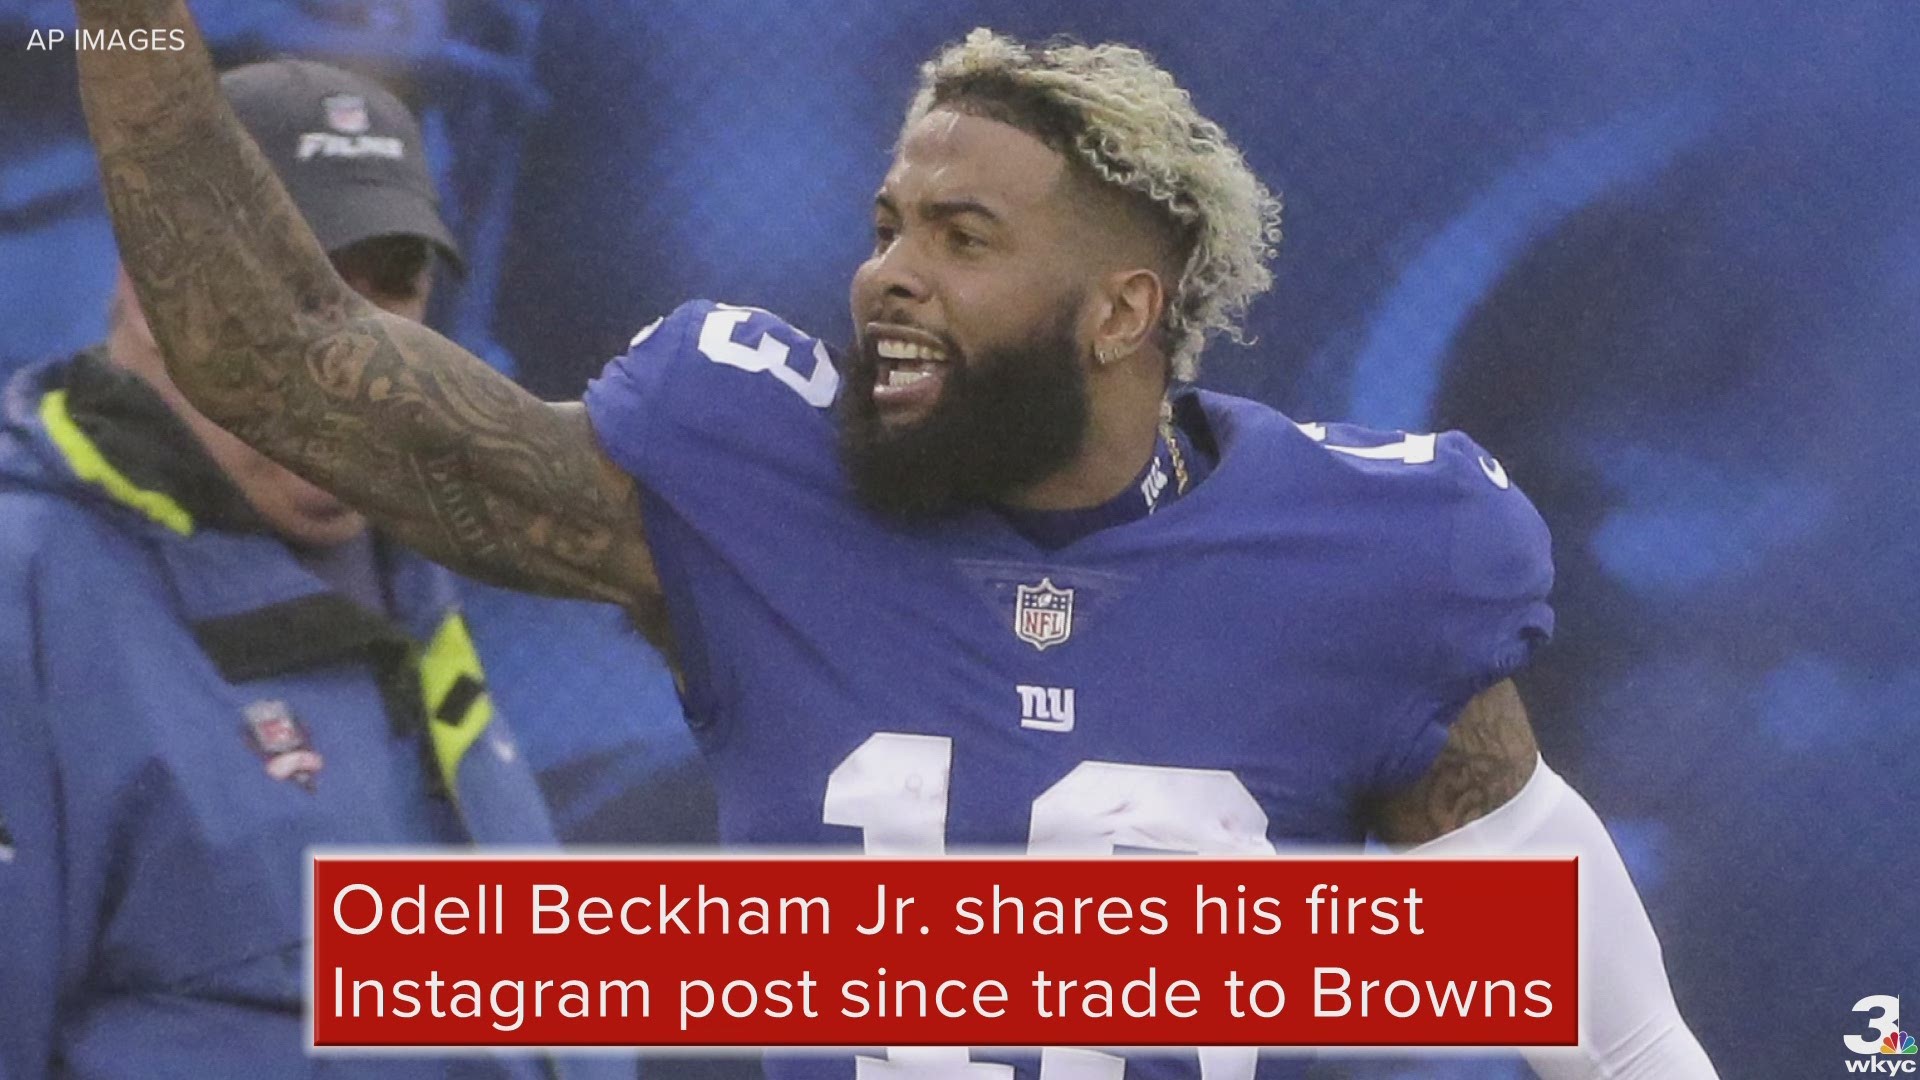 Hours after it was revealed he had been traded to the Cleveland Browns, Odell Beckham Jr. took to Instagram to celebrate the news.